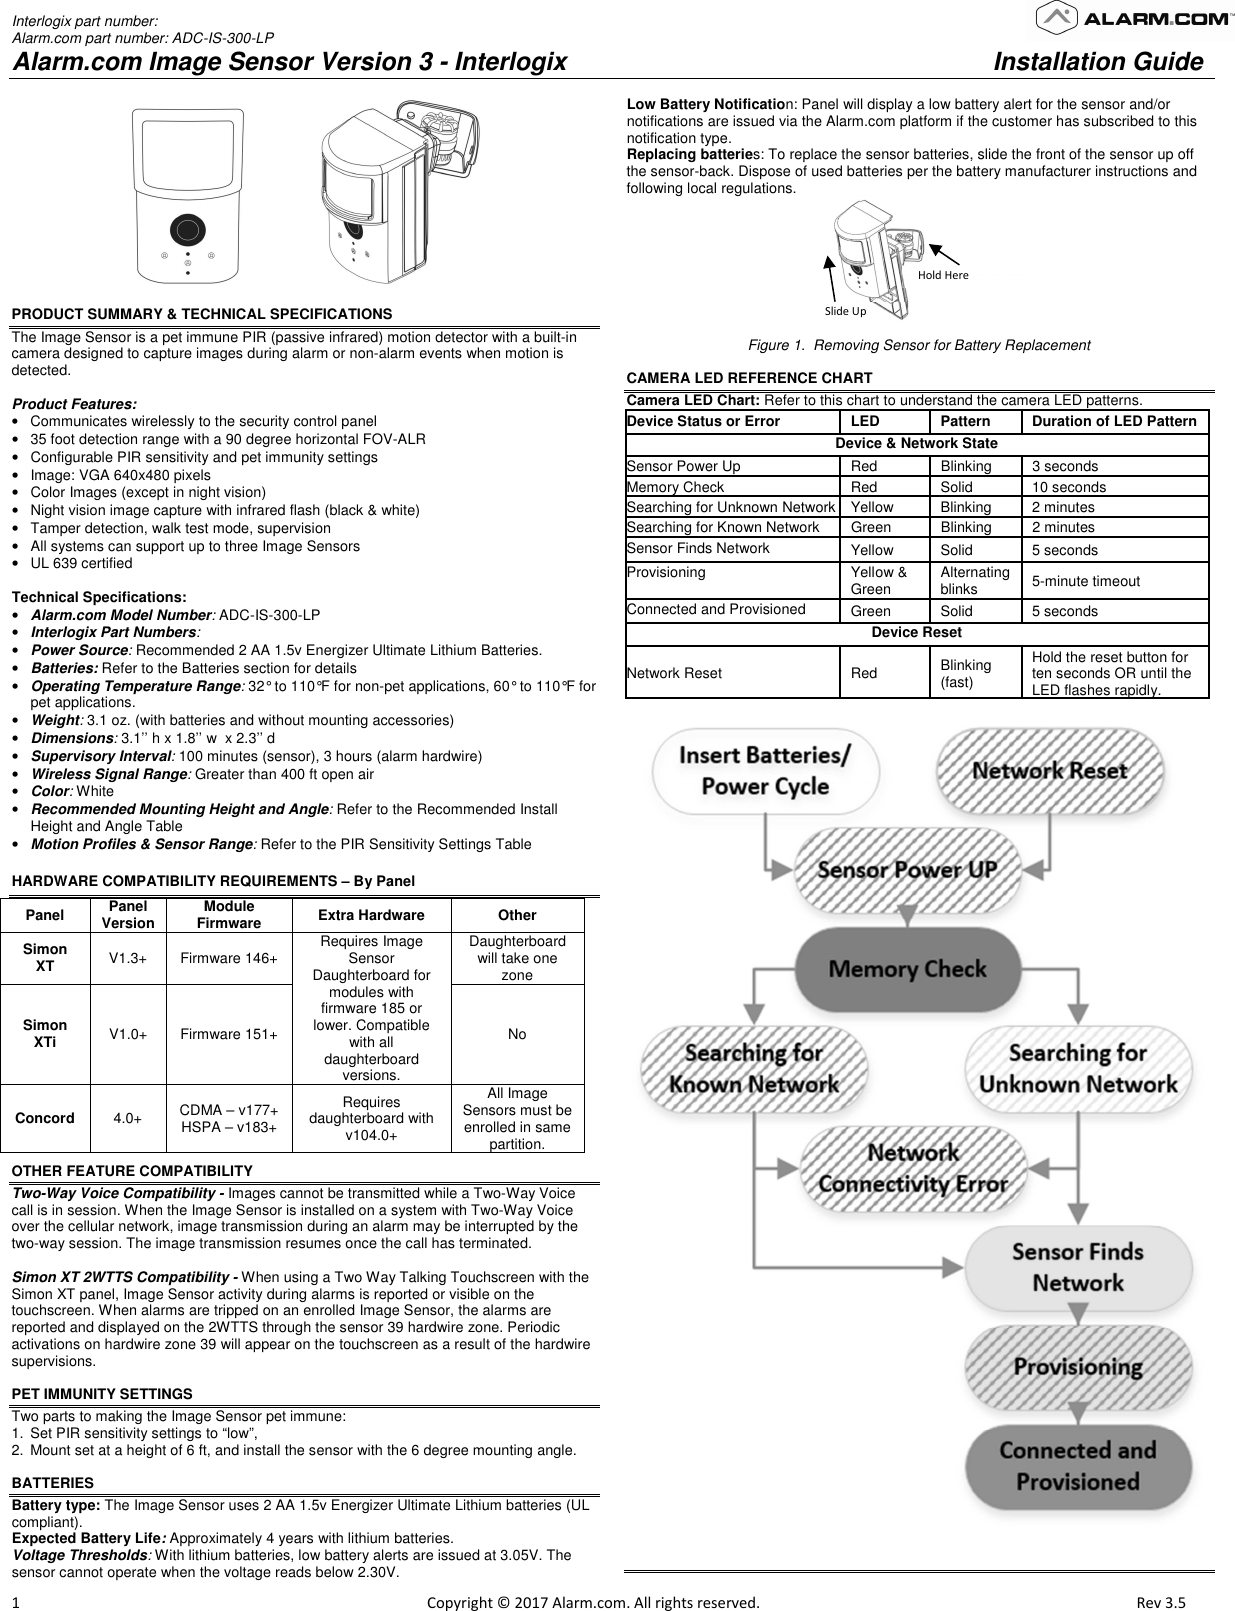 Interlogix part number:  Alarm.com part number: ADC-IS-300-LP Alarm.com Image Sensor Version 3 - Interlogix   Installation Guide                         1                                                                                                            Copyright © 2017 Alarm.com. All rights reserved.      Rev 3.5                                                   PRODUCT SUMMARY &amp; TECHNICAL SPECIFICATIONS The Image Sensor is a pet immune PIR (passive infrared) motion detector with a built-in camera designed to capture images during alarm or non-alarm events when motion is detected.   Product Features: •  Communicates wirelessly to the security control panel •  35 foot detection range with a 90 degree horizontal FOV-ALR •  Configurable PIR sensitivity and pet immunity settings  •  Image: VGA 640x480 pixels  •  Color Images (except in night vision) •  Night vision image capture with infrared flash (black &amp; white) •  Tamper detection, walk test mode, supervision •  All systems can support up to three Image Sensors  •  UL 639 certified  Technical Specifications: • Alarm.com Model Number: ADC-IS-300-LP • Interlogix Part Numbers:   • Power Source: Recommended 2 AA 1.5v Energizer Ultimate Lithium Batteries.  • Batteries: Refer to the Batteries section for details  • Operating Temperature Range: 32° to 110°F for non-pet applications, 60° to 110°F for pet applications.  • Weight: 3.1 oz. (with batteries and without mounting accessories) • Dimensions: 3.1’’ h x 1.8’’ w  x 2.3’’ d • Supervisory Interval: 100 minutes (sensor), 3 hours (alarm hardwire) • Wireless Signal Range: Greater than 400 ft open air • Color: White • Recommended Mounting Height and Angle: Refer to the Recommended Install Height and Angle Table • Motion Profiles &amp; Sensor Range: Refer to the PIR Sensitivity Settings Table HARDWARE COMPATIBILITY REQUIREMENTS – By Panel Panel  Panel Version  Module Firmware  Extra Hardware  Other Simon XT  V1.3+  Firmware 146+  Requires Image Sensor Daughterboard for modules with firmware 185 or lower. Compatible with all daughterboard versions. Daughterboard will take one zone Simon XTi  V1.0+  Firmware 151+  No Concord  4.0+  CDMA – v177+ HSPA – v183+ Requires daughterboard with v104.0+  All Image Sensors must be enrolled in same partition.  OTHER FEATURE COMPATIBILITY Two-Way Voice Compatibility - Images cannot be transmitted while a Two-Way Voice call is in session. When the Image Sensor is installed on a system with Two-Way Voice over the cellular network, image transmission during an alarm may be interrupted by the two-way session. The image transmission resumes once the call has terminated.  Simon XT 2WTTS Compatibility - When using a Two Way Talking Touchscreen with the Simon XT panel, Image Sensor activity during alarms is reported or visible on the touchscreen. When alarms are tripped on an enrolled Image Sensor, the alarms are reported and displayed on the 2WTTS through the sensor 39 hardwire zone. Periodic activations on hardwire zone 39 will appear on the touchscreen as a result of the hardwire supervisions.   PET IMMUNITY SETTINGS Two parts to making the Image Sensor pet immune: 1.  Set PIR sensitivity settings to “low”,  2.  Mount set at a height of 6 ft, and install the sensor with the 6 degree mounting angle.  BATTERIES Battery type: The Image Sensor uses 2 AA 1.5v Energizer Ultimate Lithium batteries (UL compliant). Expected Battery Life: Approximately 4 years with lithium batteries.  Voltage Thresholds: With lithium batteries, low battery alerts are issued at 3.05V. The sensor cannot operate when the voltage reads below 2.30V. Low Battery Notification: Panel will display a low battery alert for the sensor and/or notifications are issued via the Alarm.com platform if the customer has subscribed to this notification type.  Replacing batteries: To replace the sensor batteries, slide the front of the sensor up off the sensor-back. Dispose of used batteries per the battery manufacturer instructions and following local regulations.  Figure 1.  Removing Sensor for Battery Replacement  CAMERA LED REFERENCE CHART Camera LED Chart: Refer to this chart to understand the camera LED patterns.  Device Status or Error  LED   Pattern   Duration of LED Pattern  Device &amp; Network State Sensor Power Up  Red  Blinking  3 seconds Memory Check  Red  Solid  10 seconds Searching for Unknown Network Yellow  Blinking  2 minutes  Searching for Known Network  Green  Blinking  2 minutes  Sensor Finds Network  Yellow  Solid  5 seconds Provisioning  Yellow &amp; Green  Alternating blinks  5-minute timeout Connected and Provisioned  Green  Solid  5 seconds Device Reset  Network Reset  Red  Blinking (fast) Hold the reset button for ten seconds OR until the LED flashes rapidly.      Hold Here Slide Up 